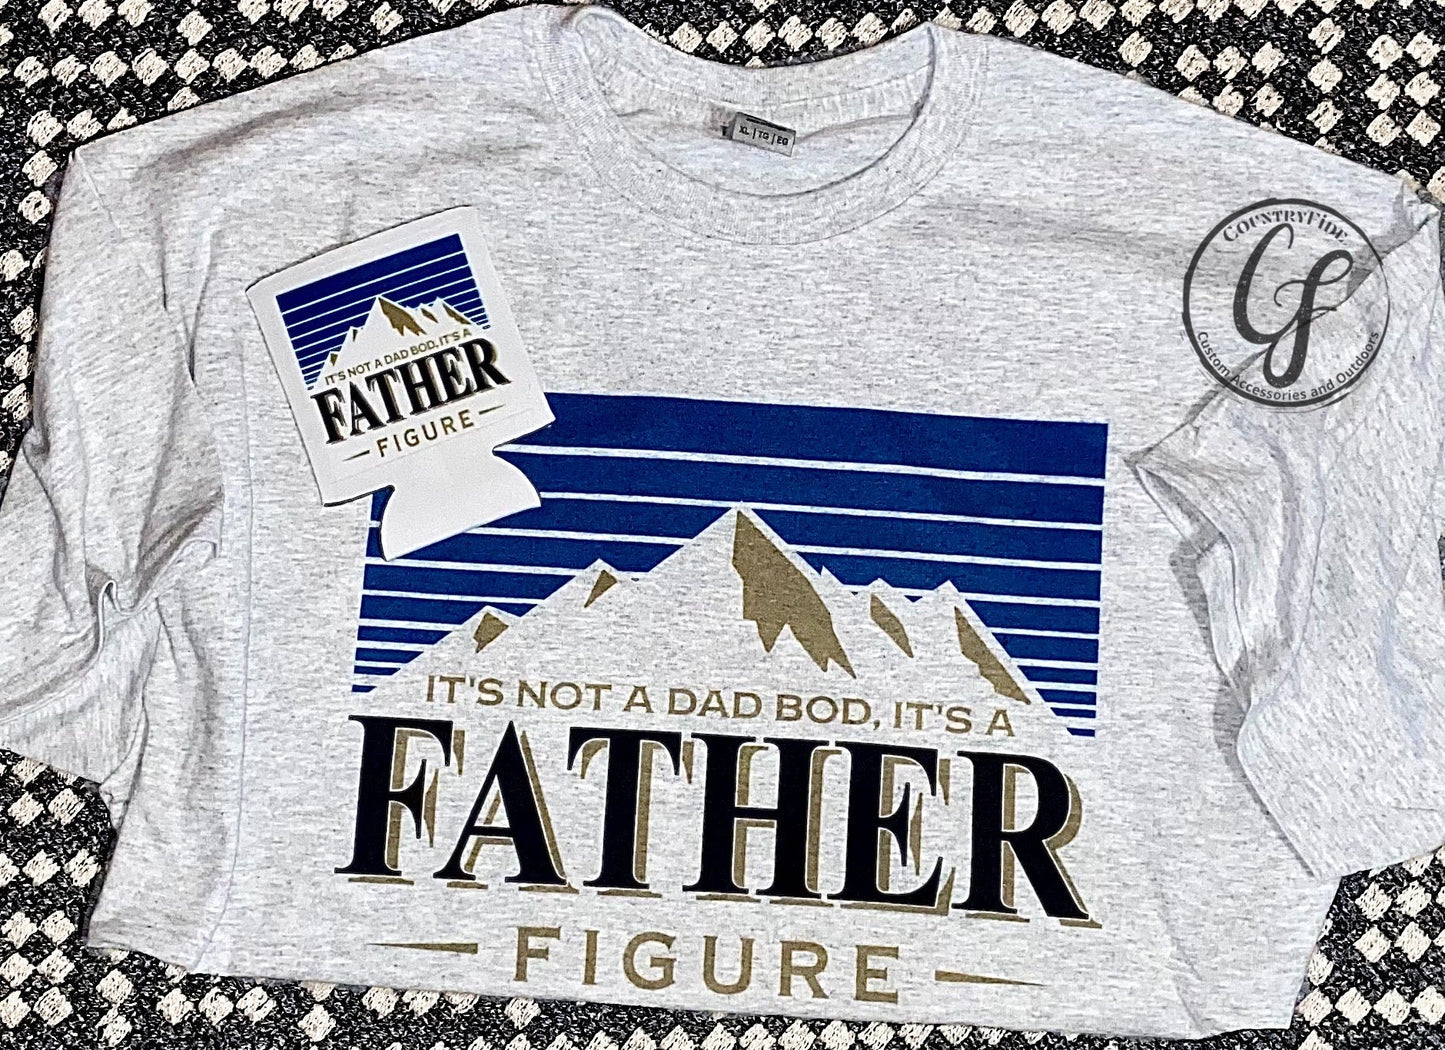 FATHER FIGURE - CountryFide Custom Accessories and Outdoors